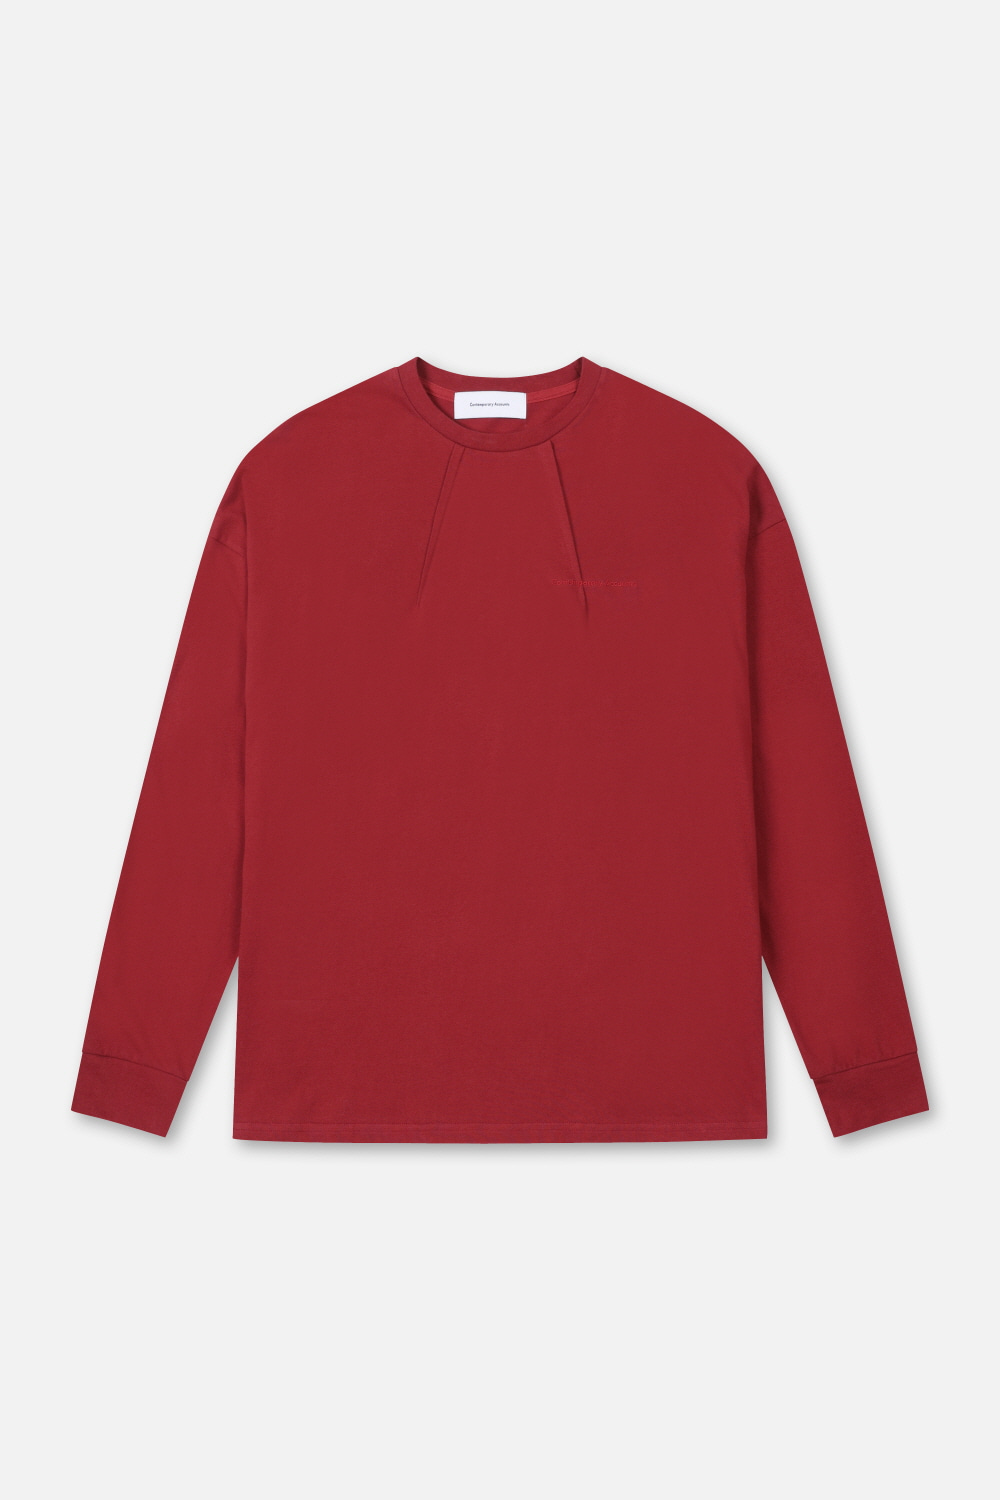 EMBROIDERY DETAIL LONG SLEEVE T-SHIRT (BURGUNDY)